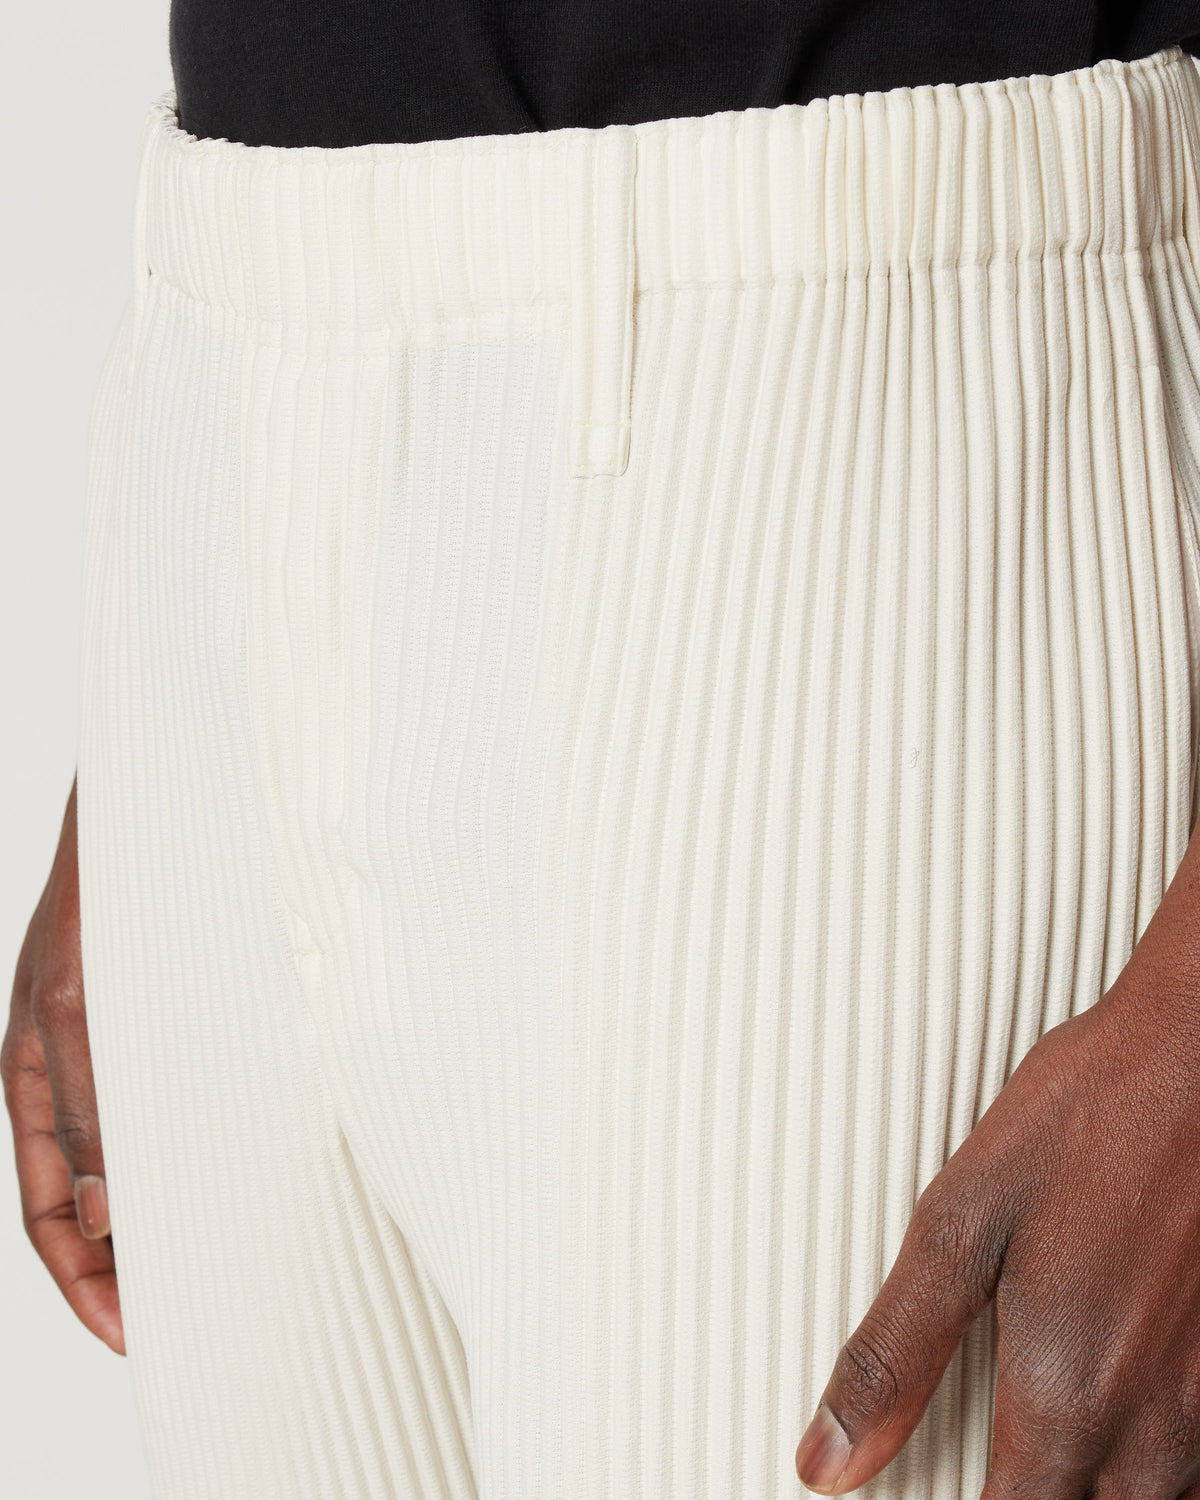 Save money on Color Pleats Pant Homme Plissé Issey Miyake . Find